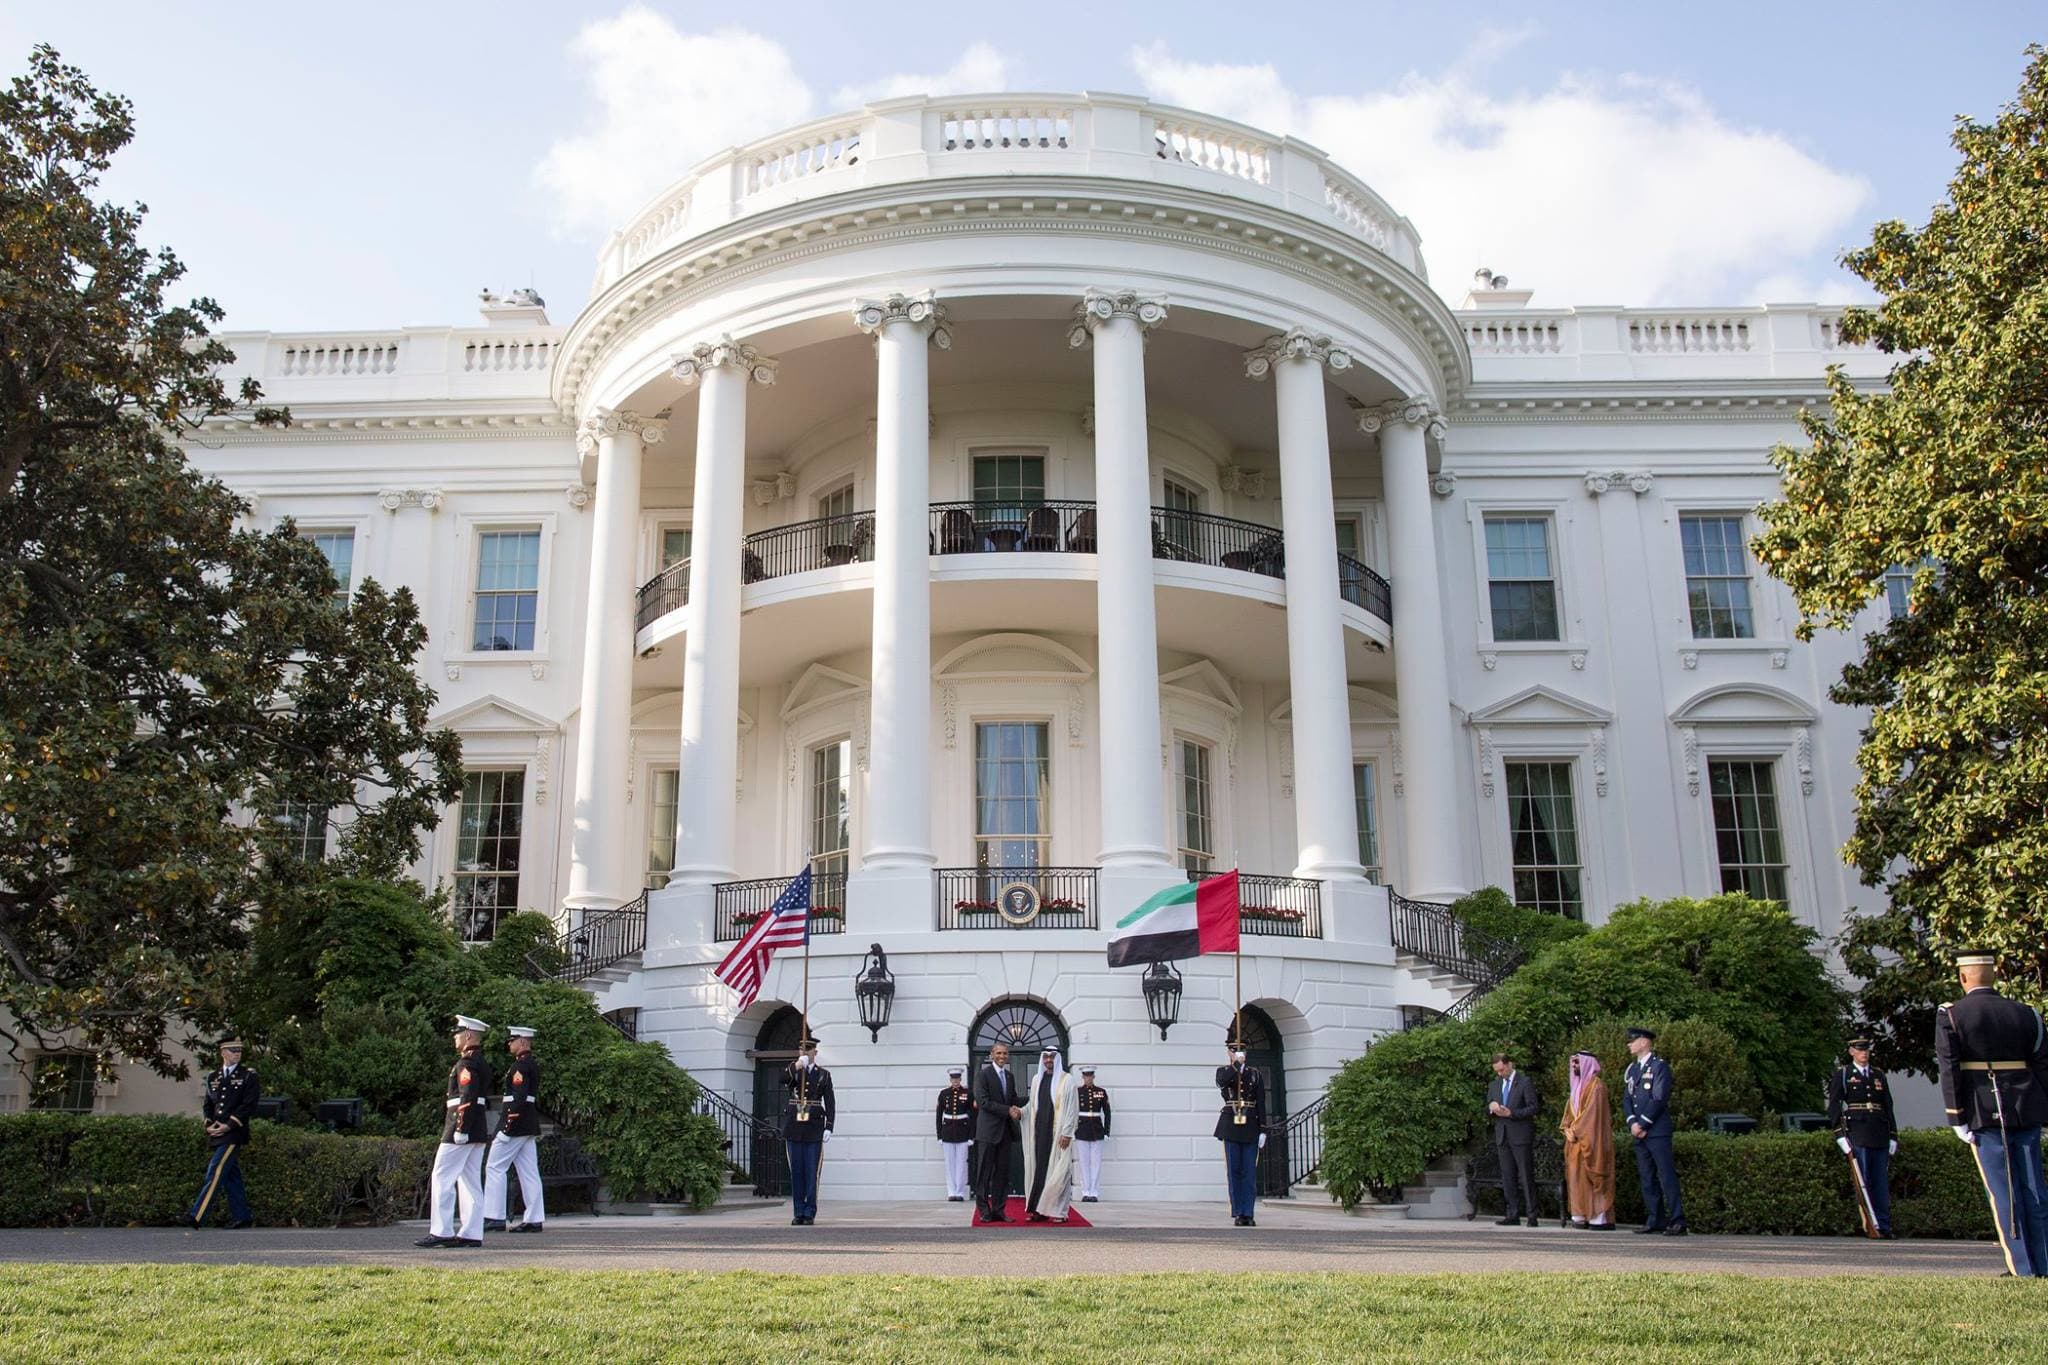 His Highness Sheikh Mohamed bin Zayed Al Nahyan, Crown Prince of Abu Dhabi and Deputy Supreme Commander of the United Arab Emiratess Armed Forces, met with US President Barack Obama and Vice President Joe Biden at The White House today to discuss a range of bilateral and regional issues. More Here: http://ow.ly/LS7wg#UAEUSA